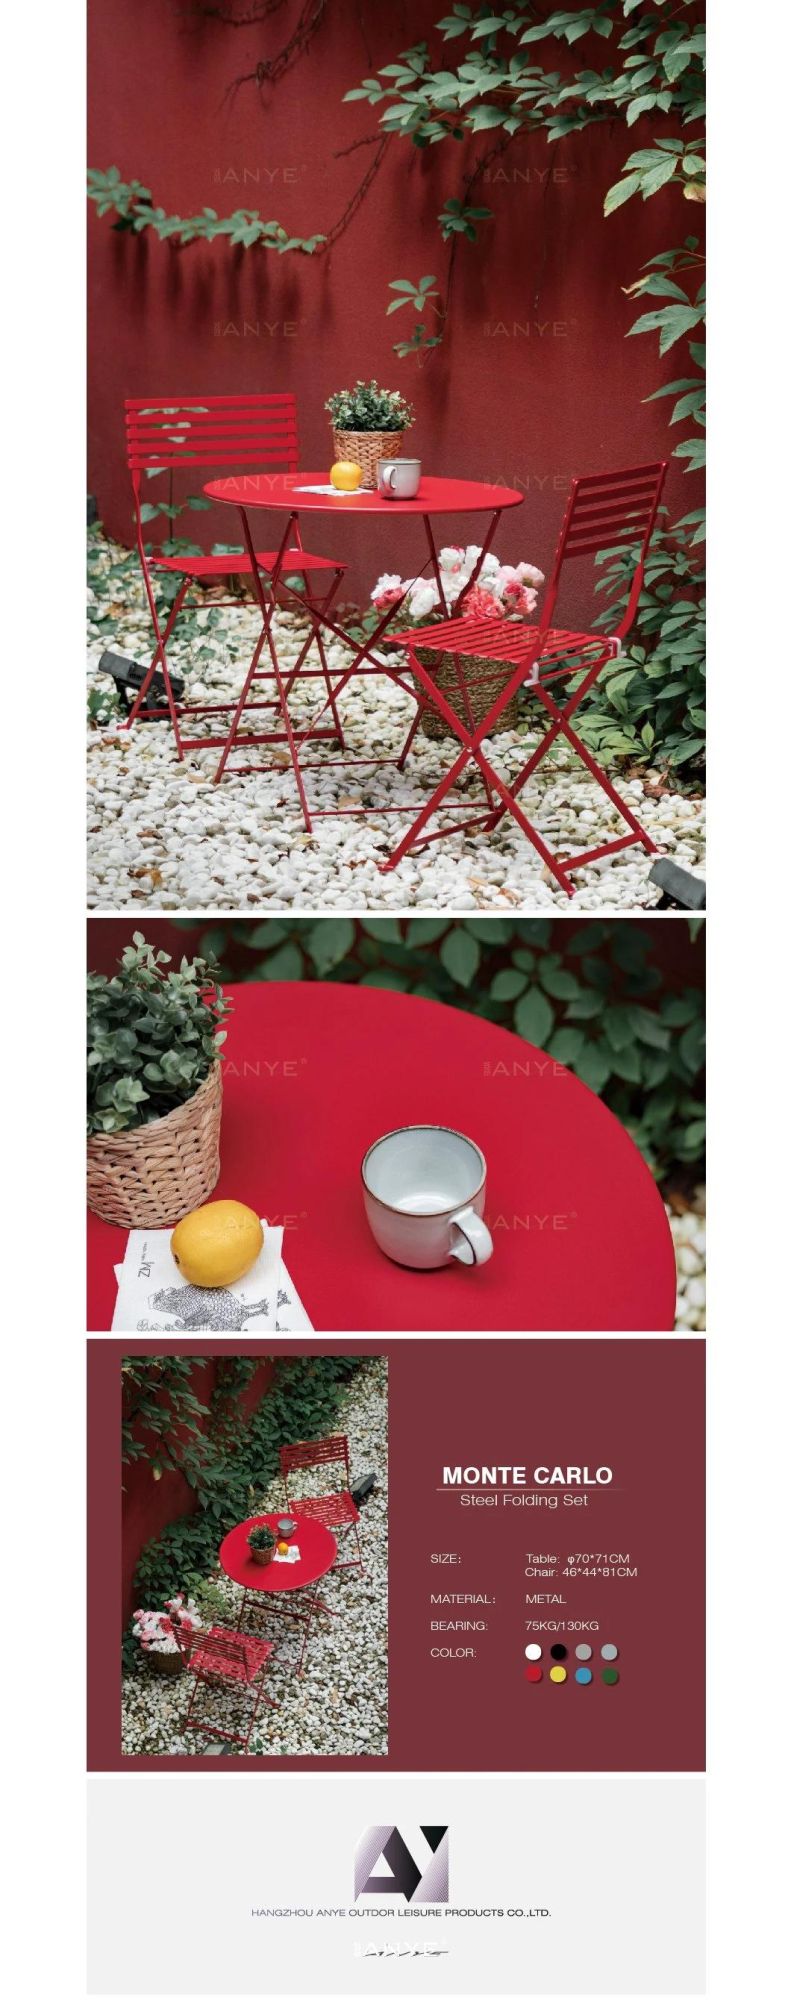 Balcony Furniture Rust Resistant Foldable Dining Table and Chair Modern Casual Furniture for Outdoor